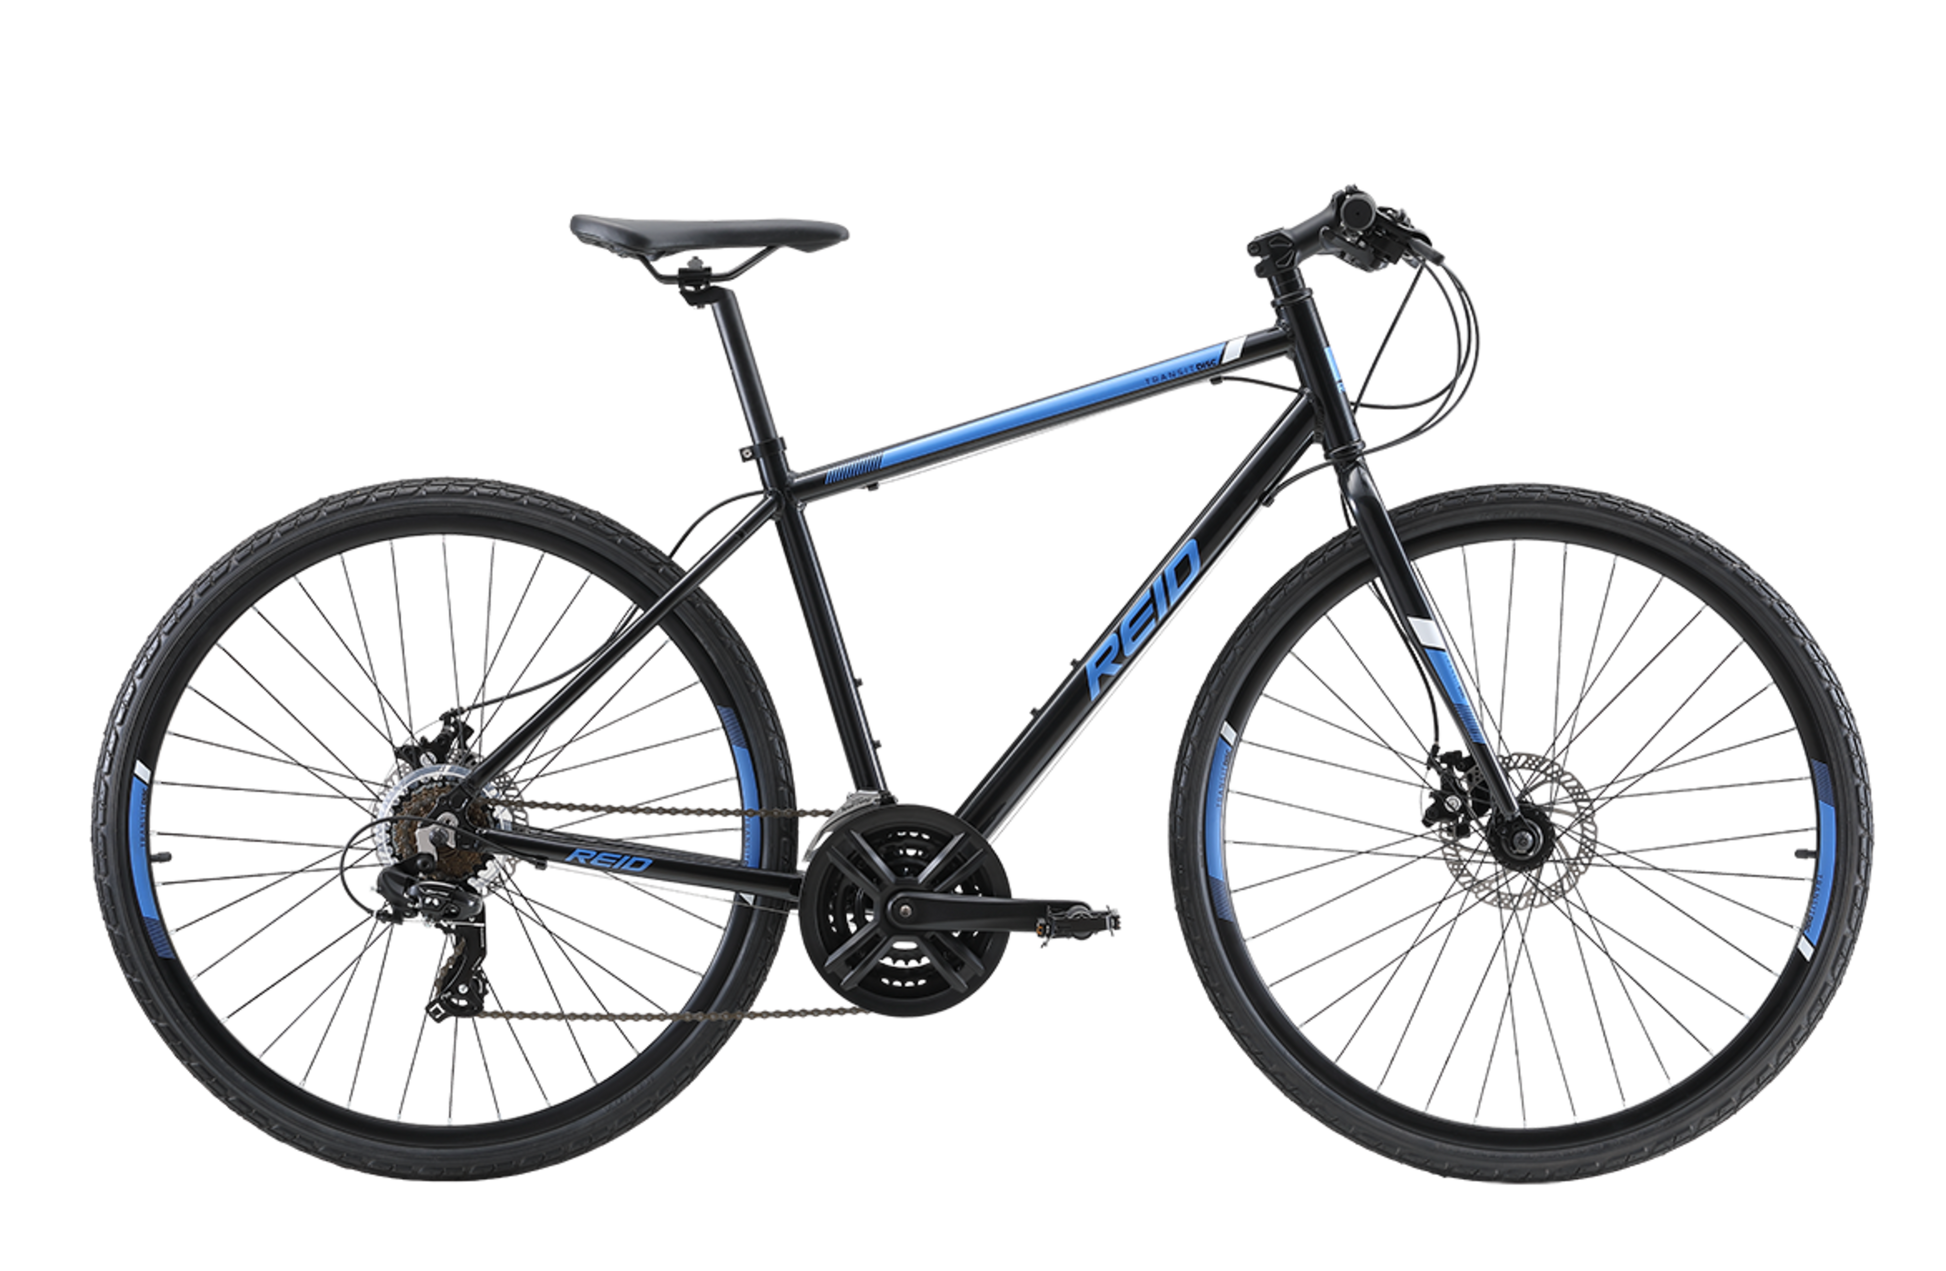 Transit Disc commuter bike in black with Shimano 7-speed gearing from Reid Cycles Australia 